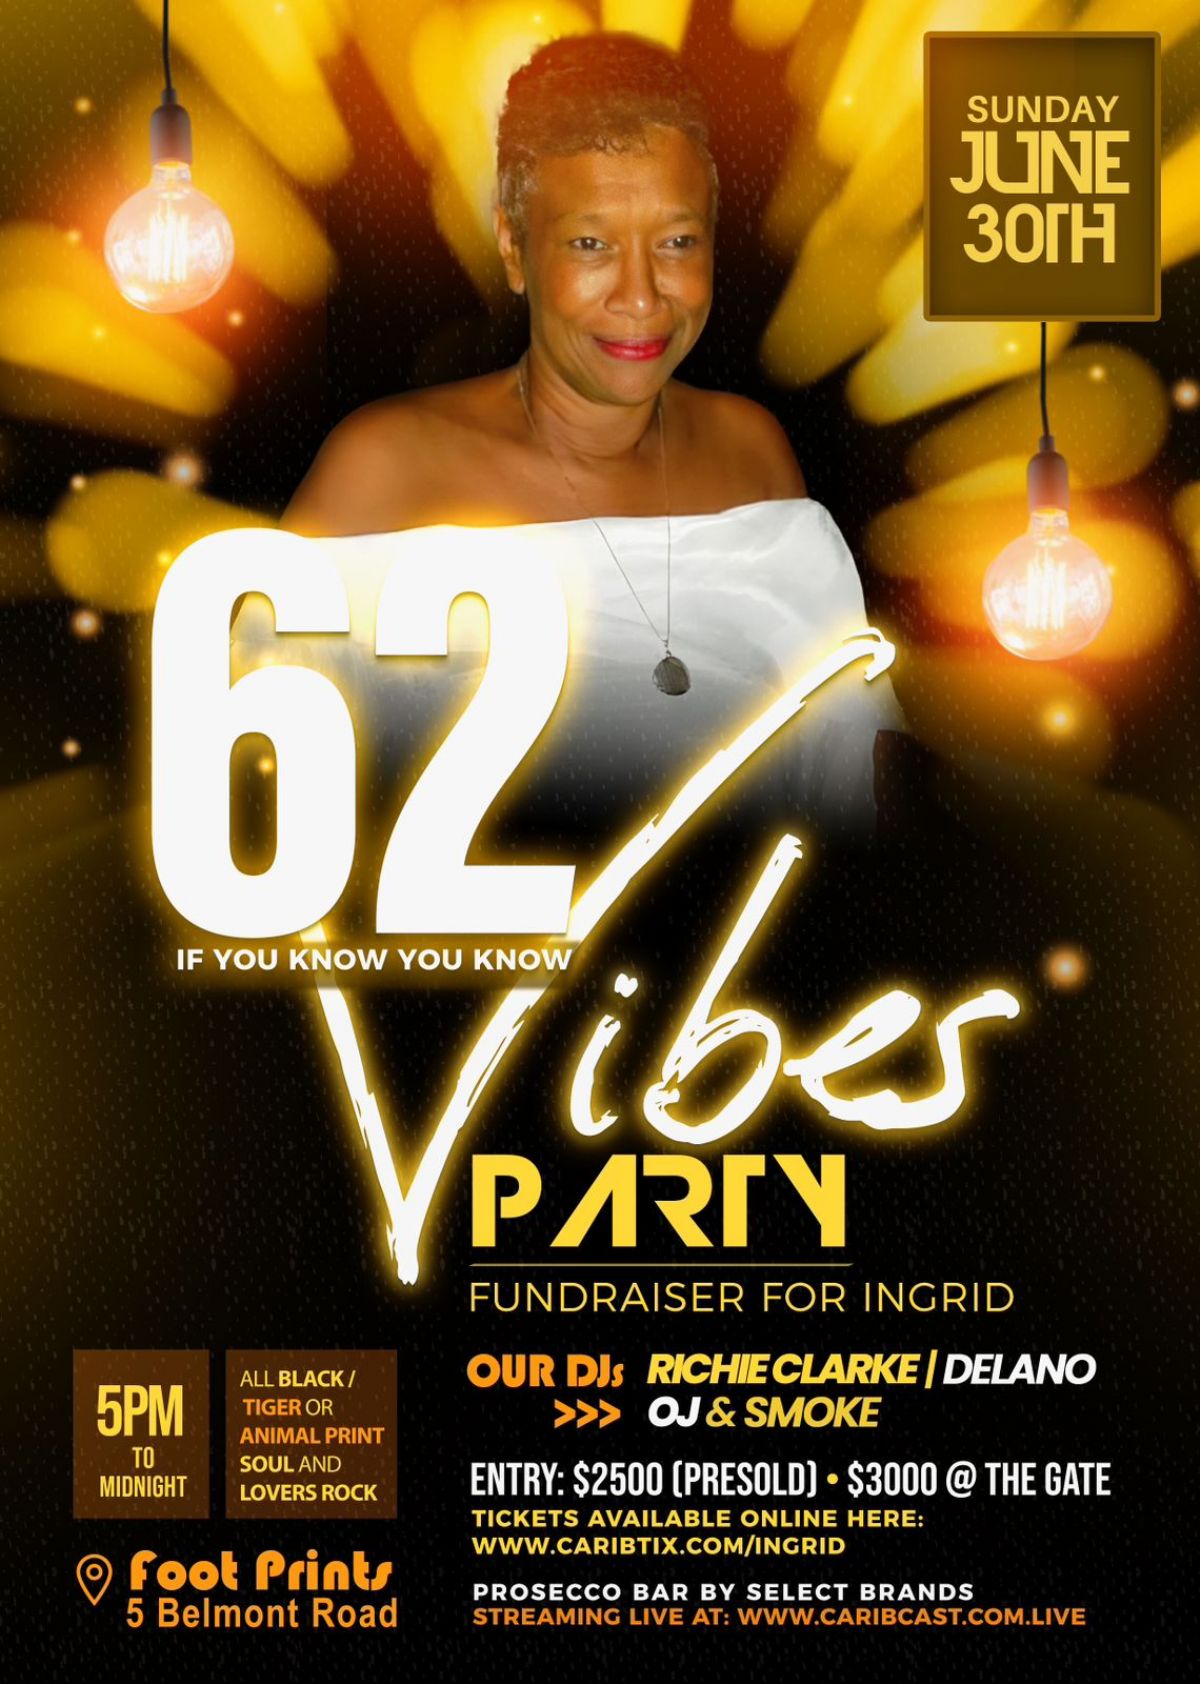 62 If you know you know - Vibes Party Event Poster